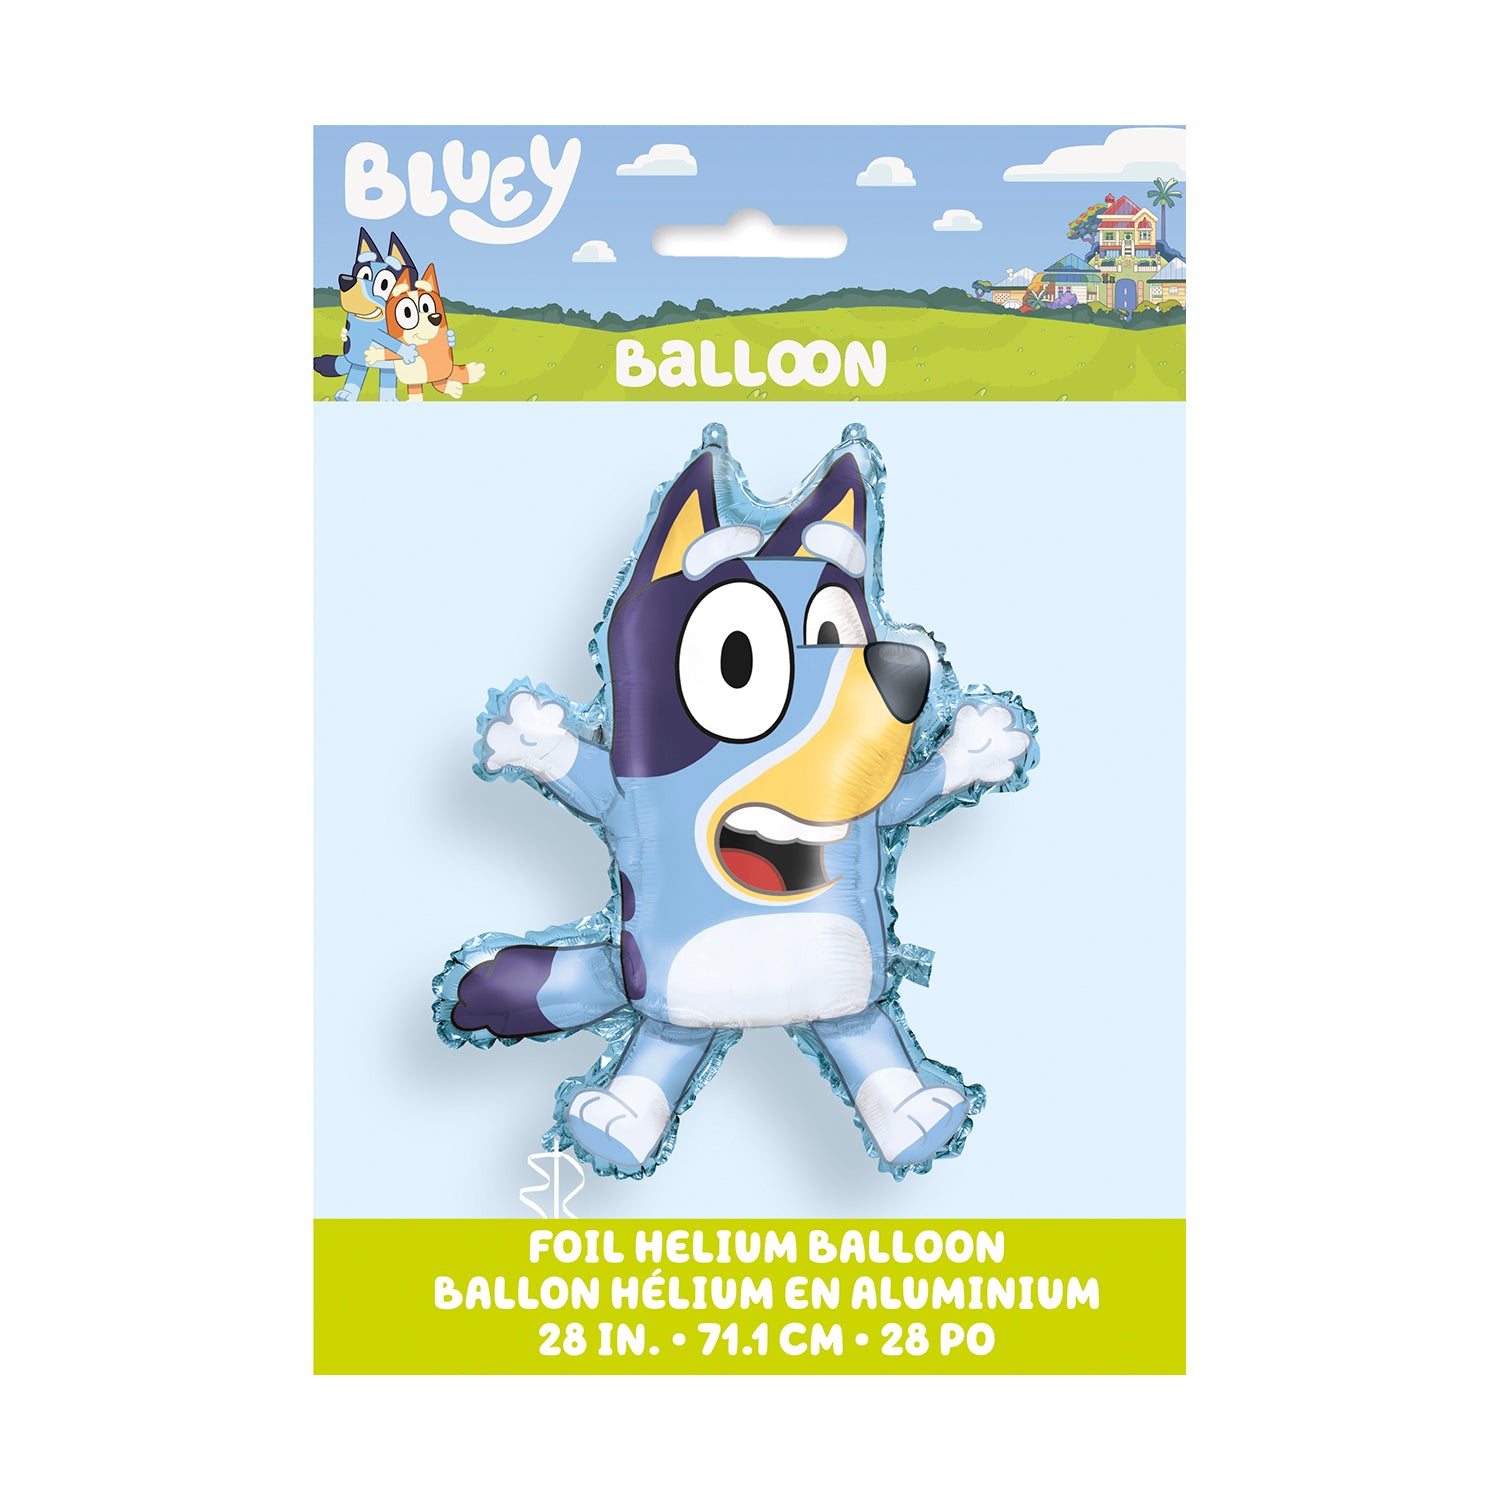 Bluey Hanging Swirl Party Decorations [3 per Pack] 